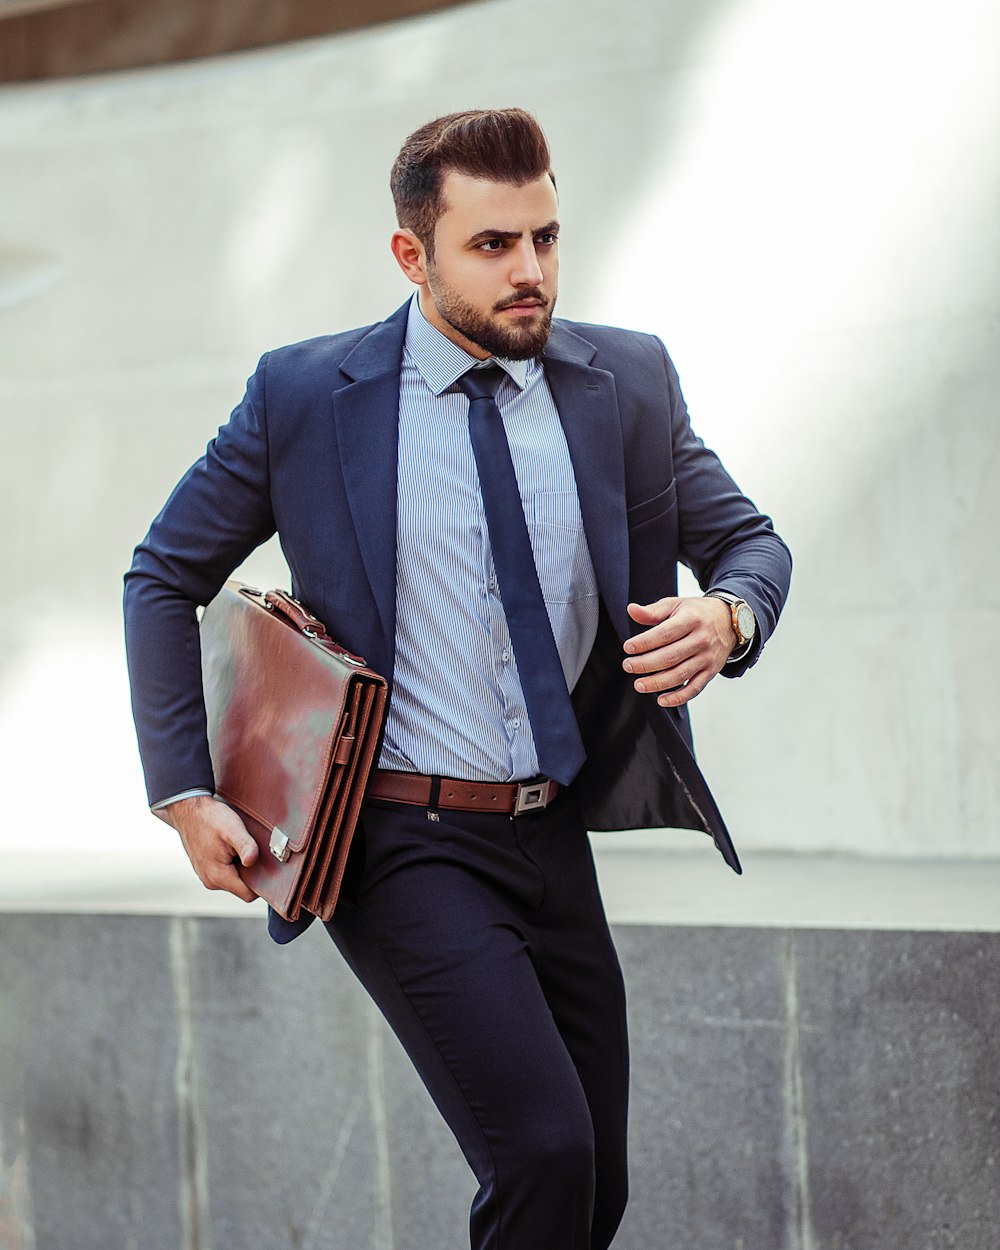 Man in blue suit jacket and black pants holding brown leather bag photo –  Free استان تهران، ایران Image on Unsplash